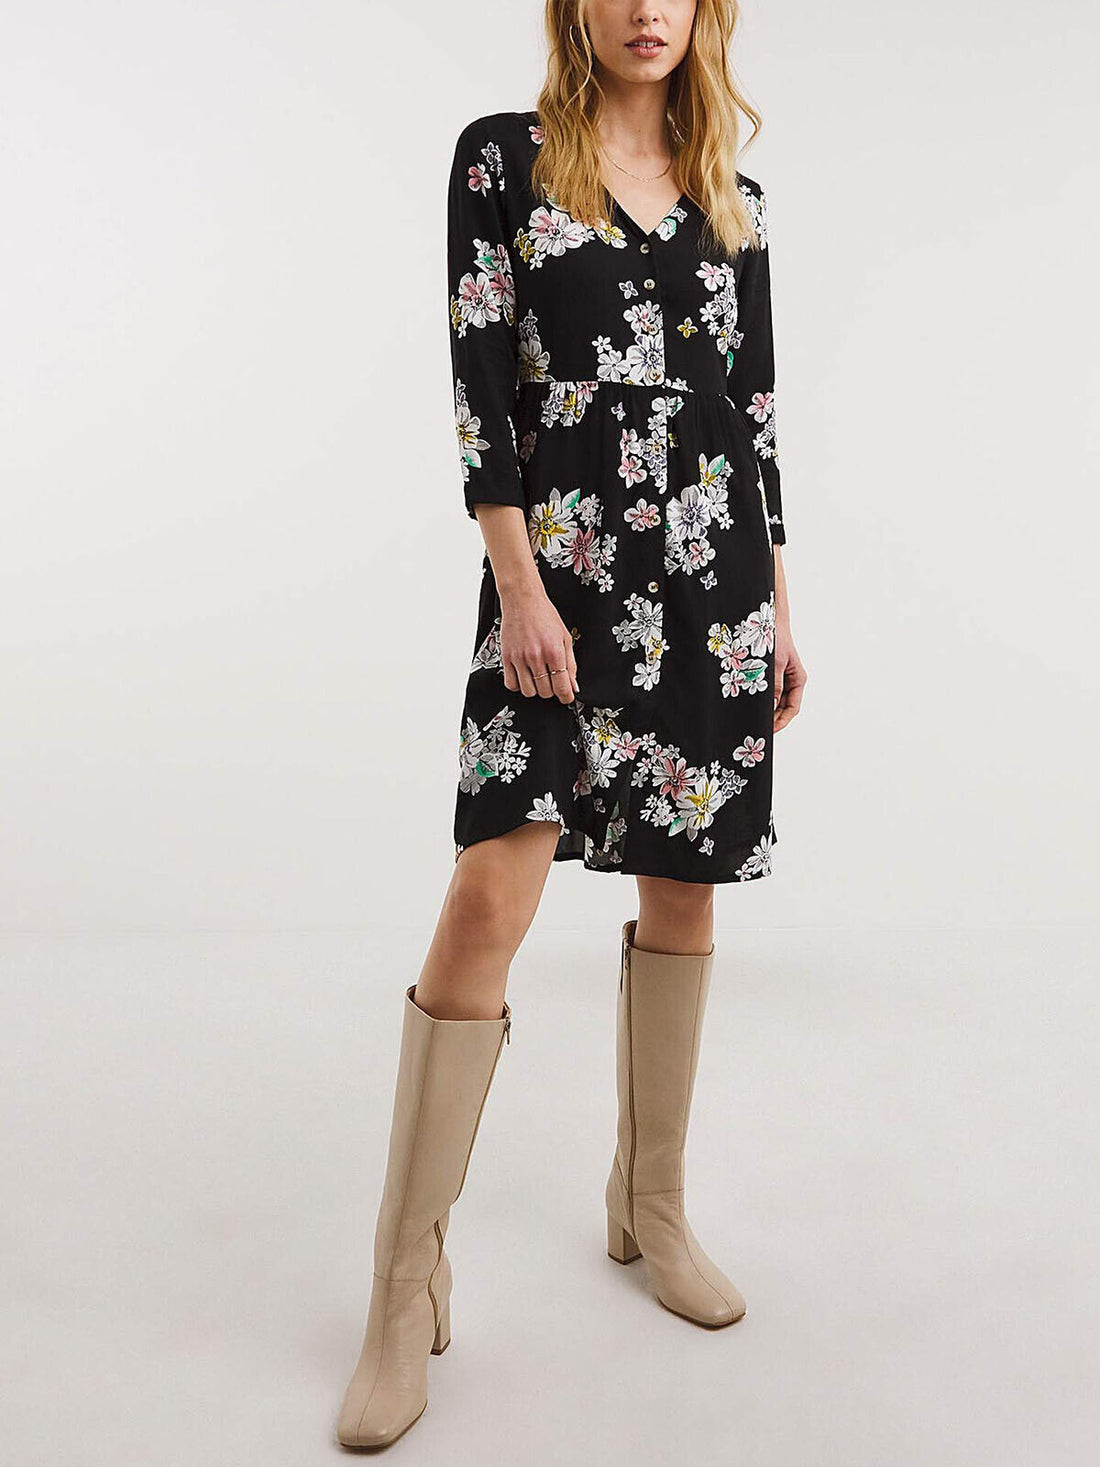 JD Williams Black Floral Relaxed Button Through Smock Dress 12 14 18 22 26 28